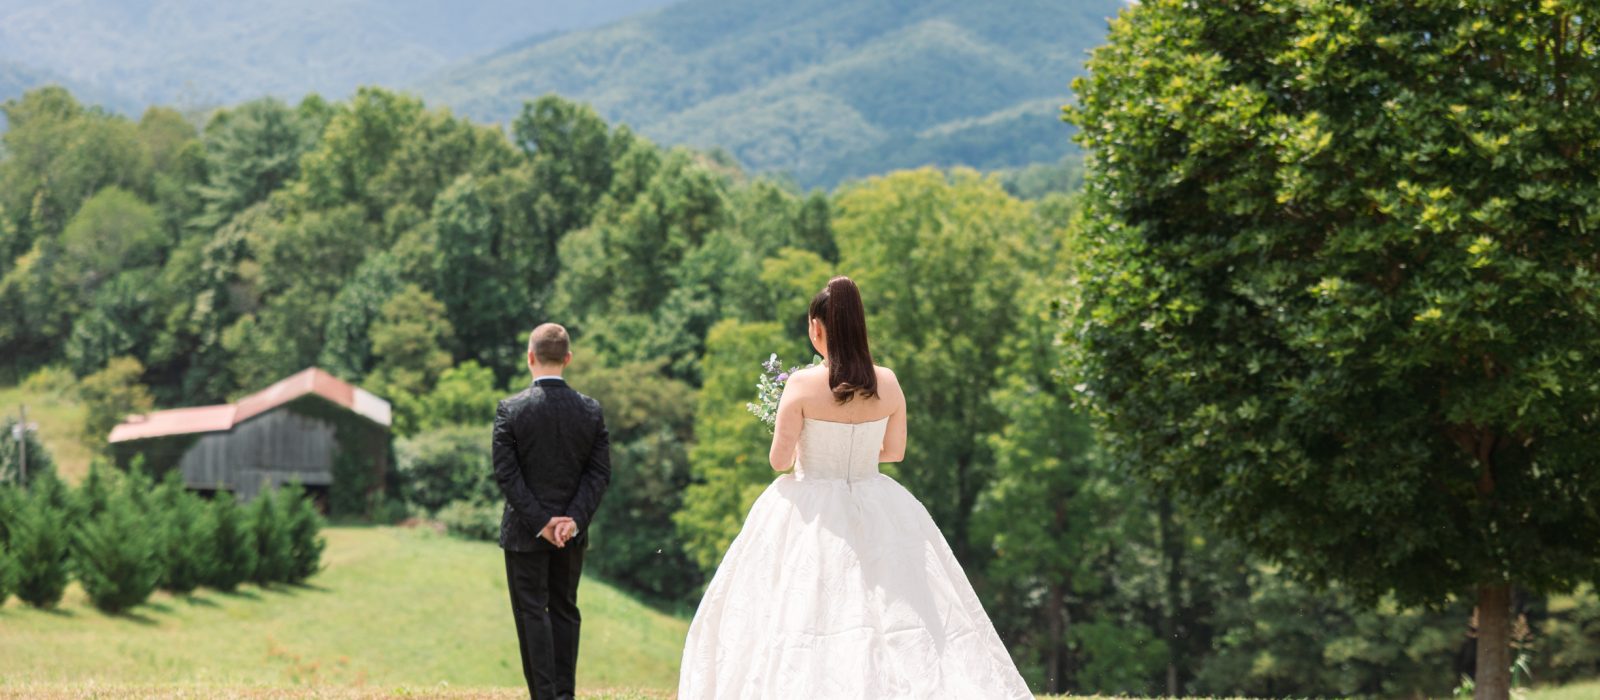 first look at the ridge wedding venue with mountains in the background